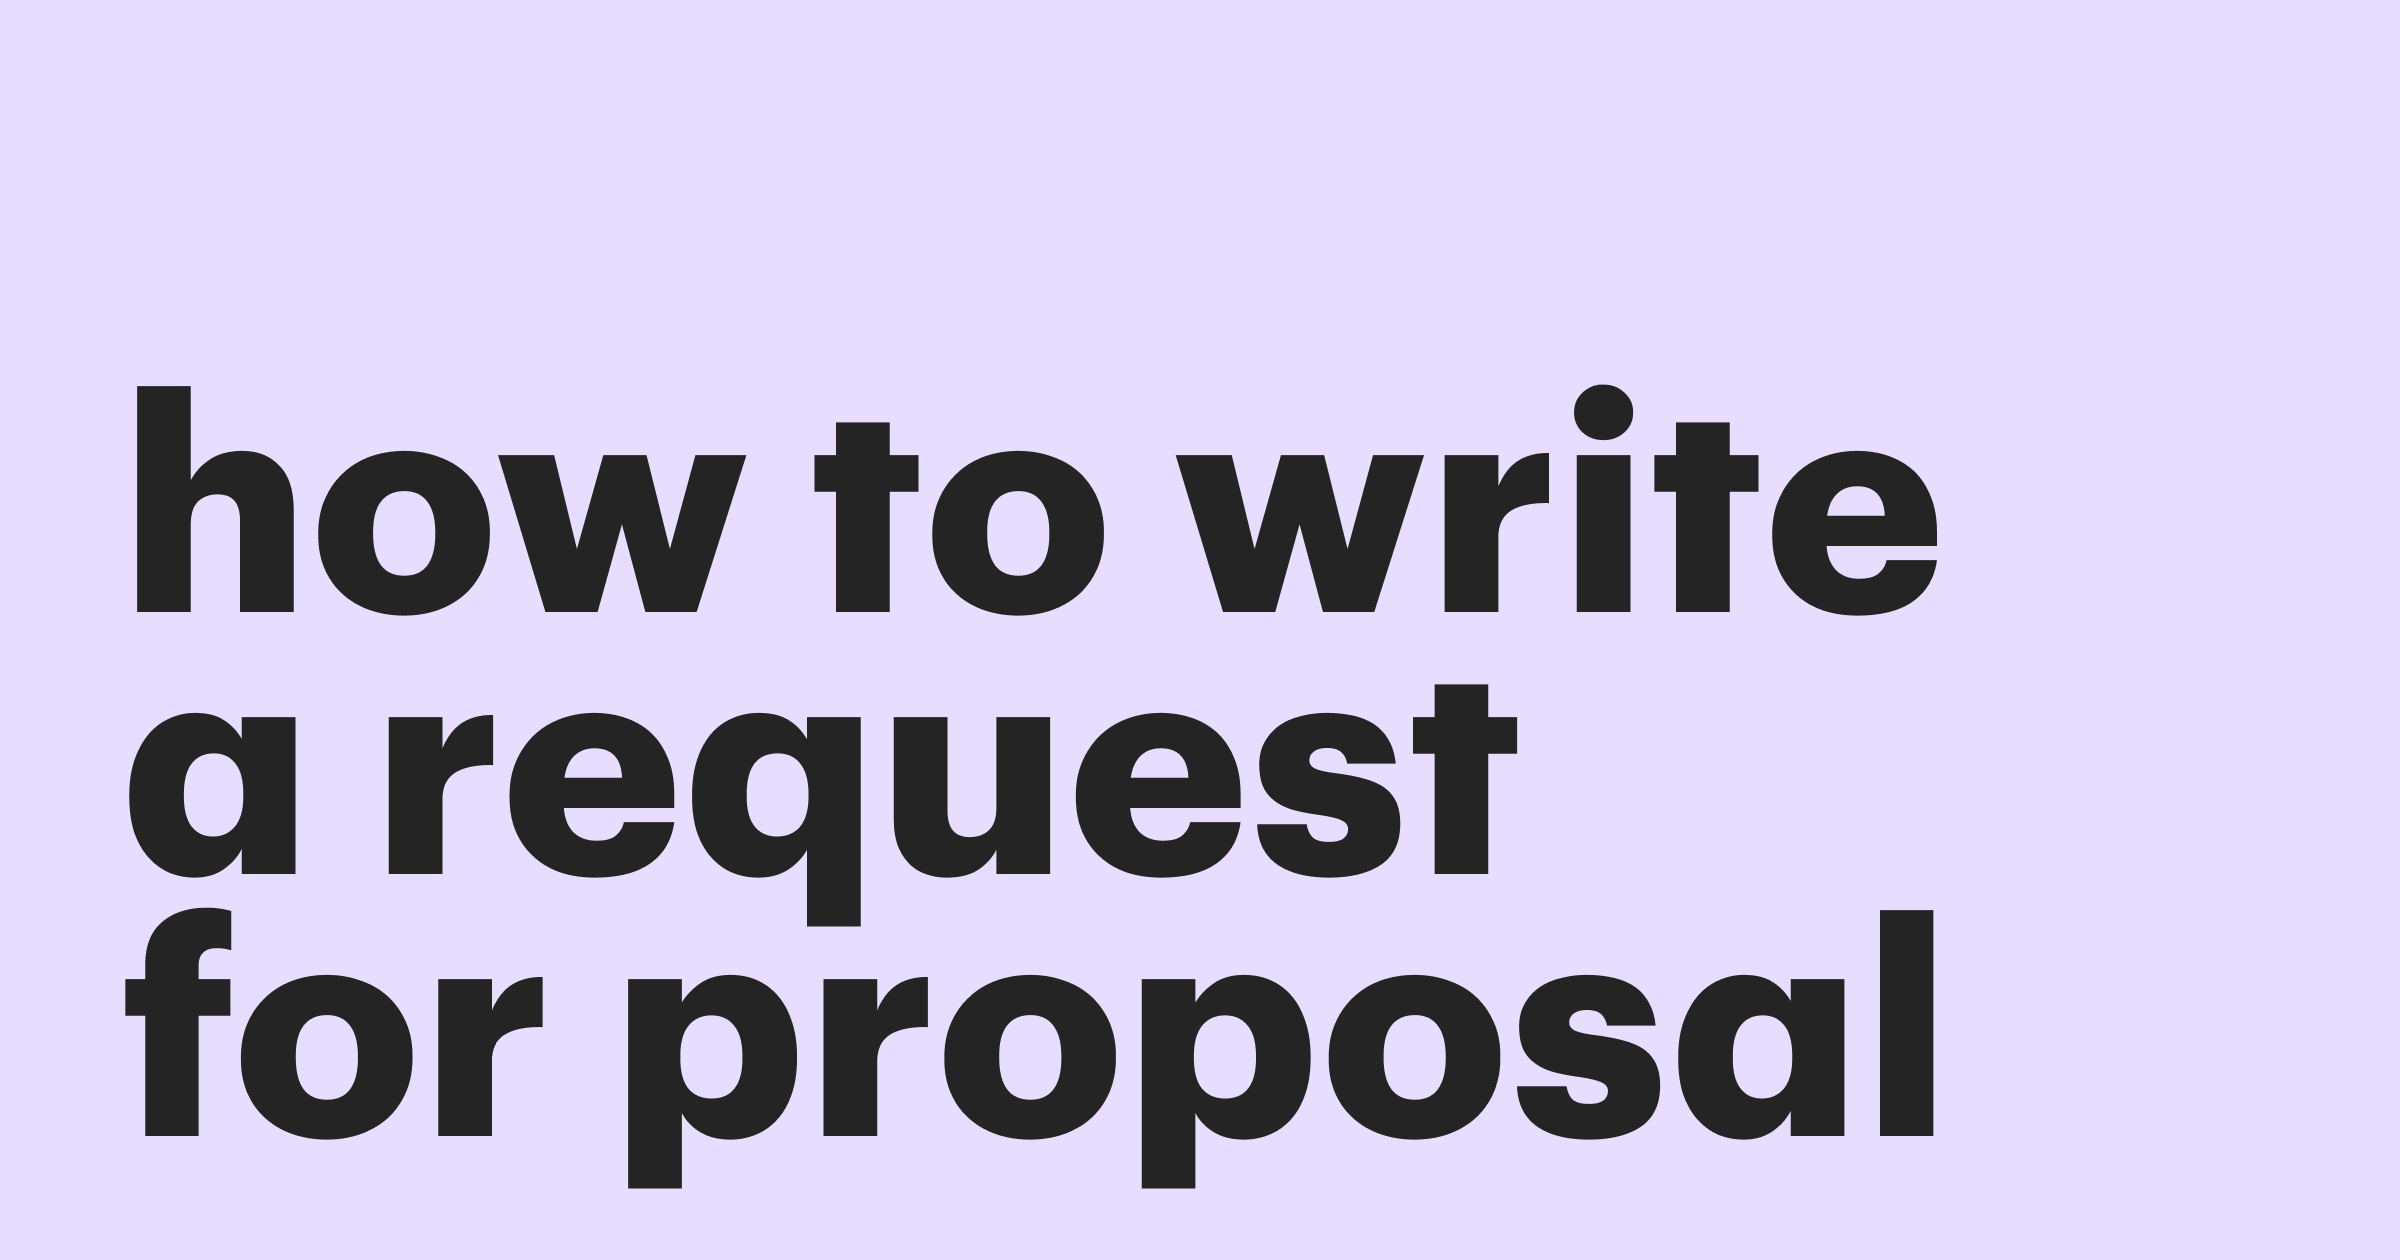 How to Write a Request for Proposals